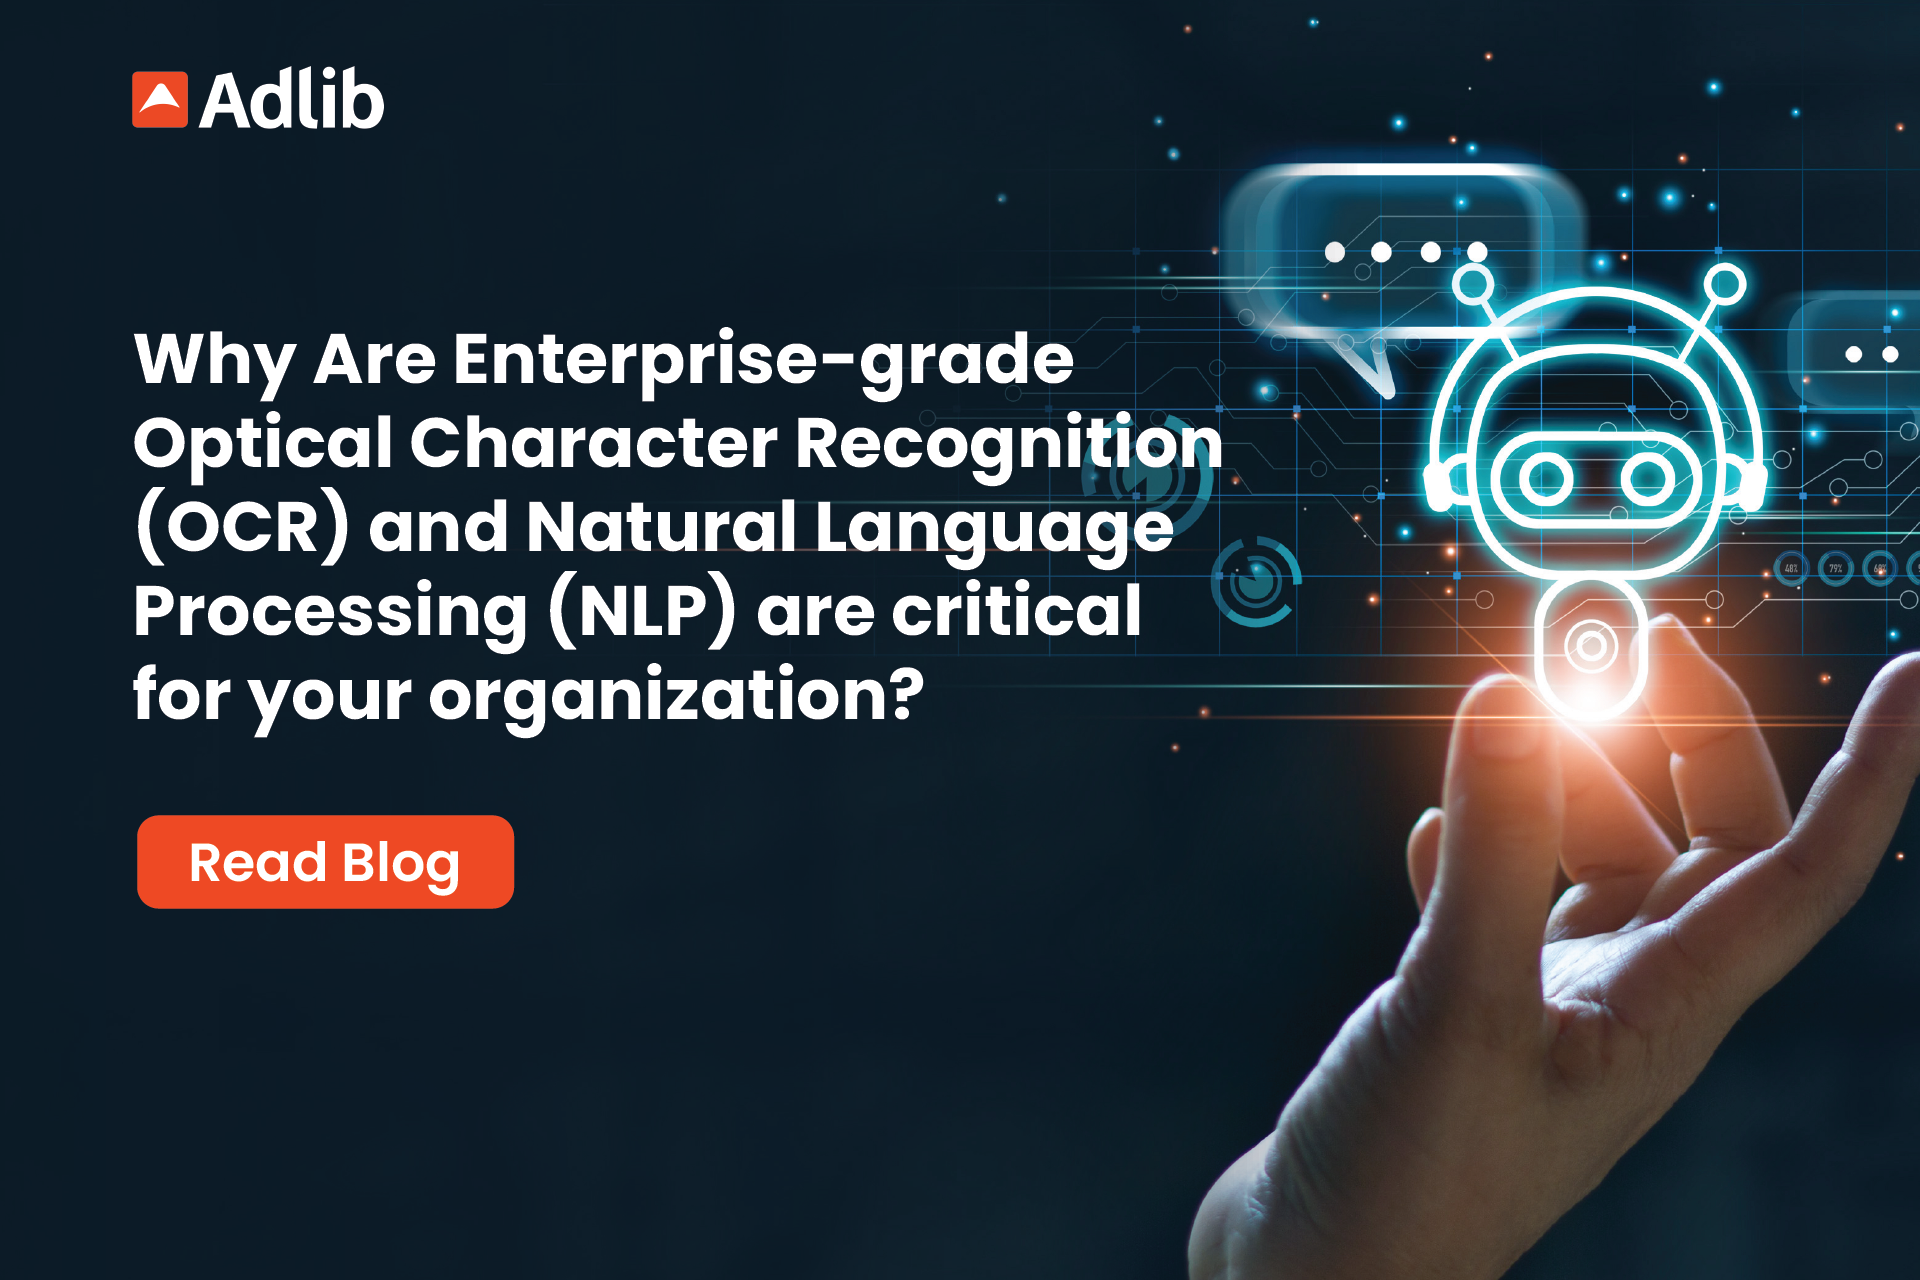 Adlib Blog Social Template - Here is why Enterprise-grade Optical Character Recognition (OCR) and Natural Language Processing (NLP) are critical for your organization